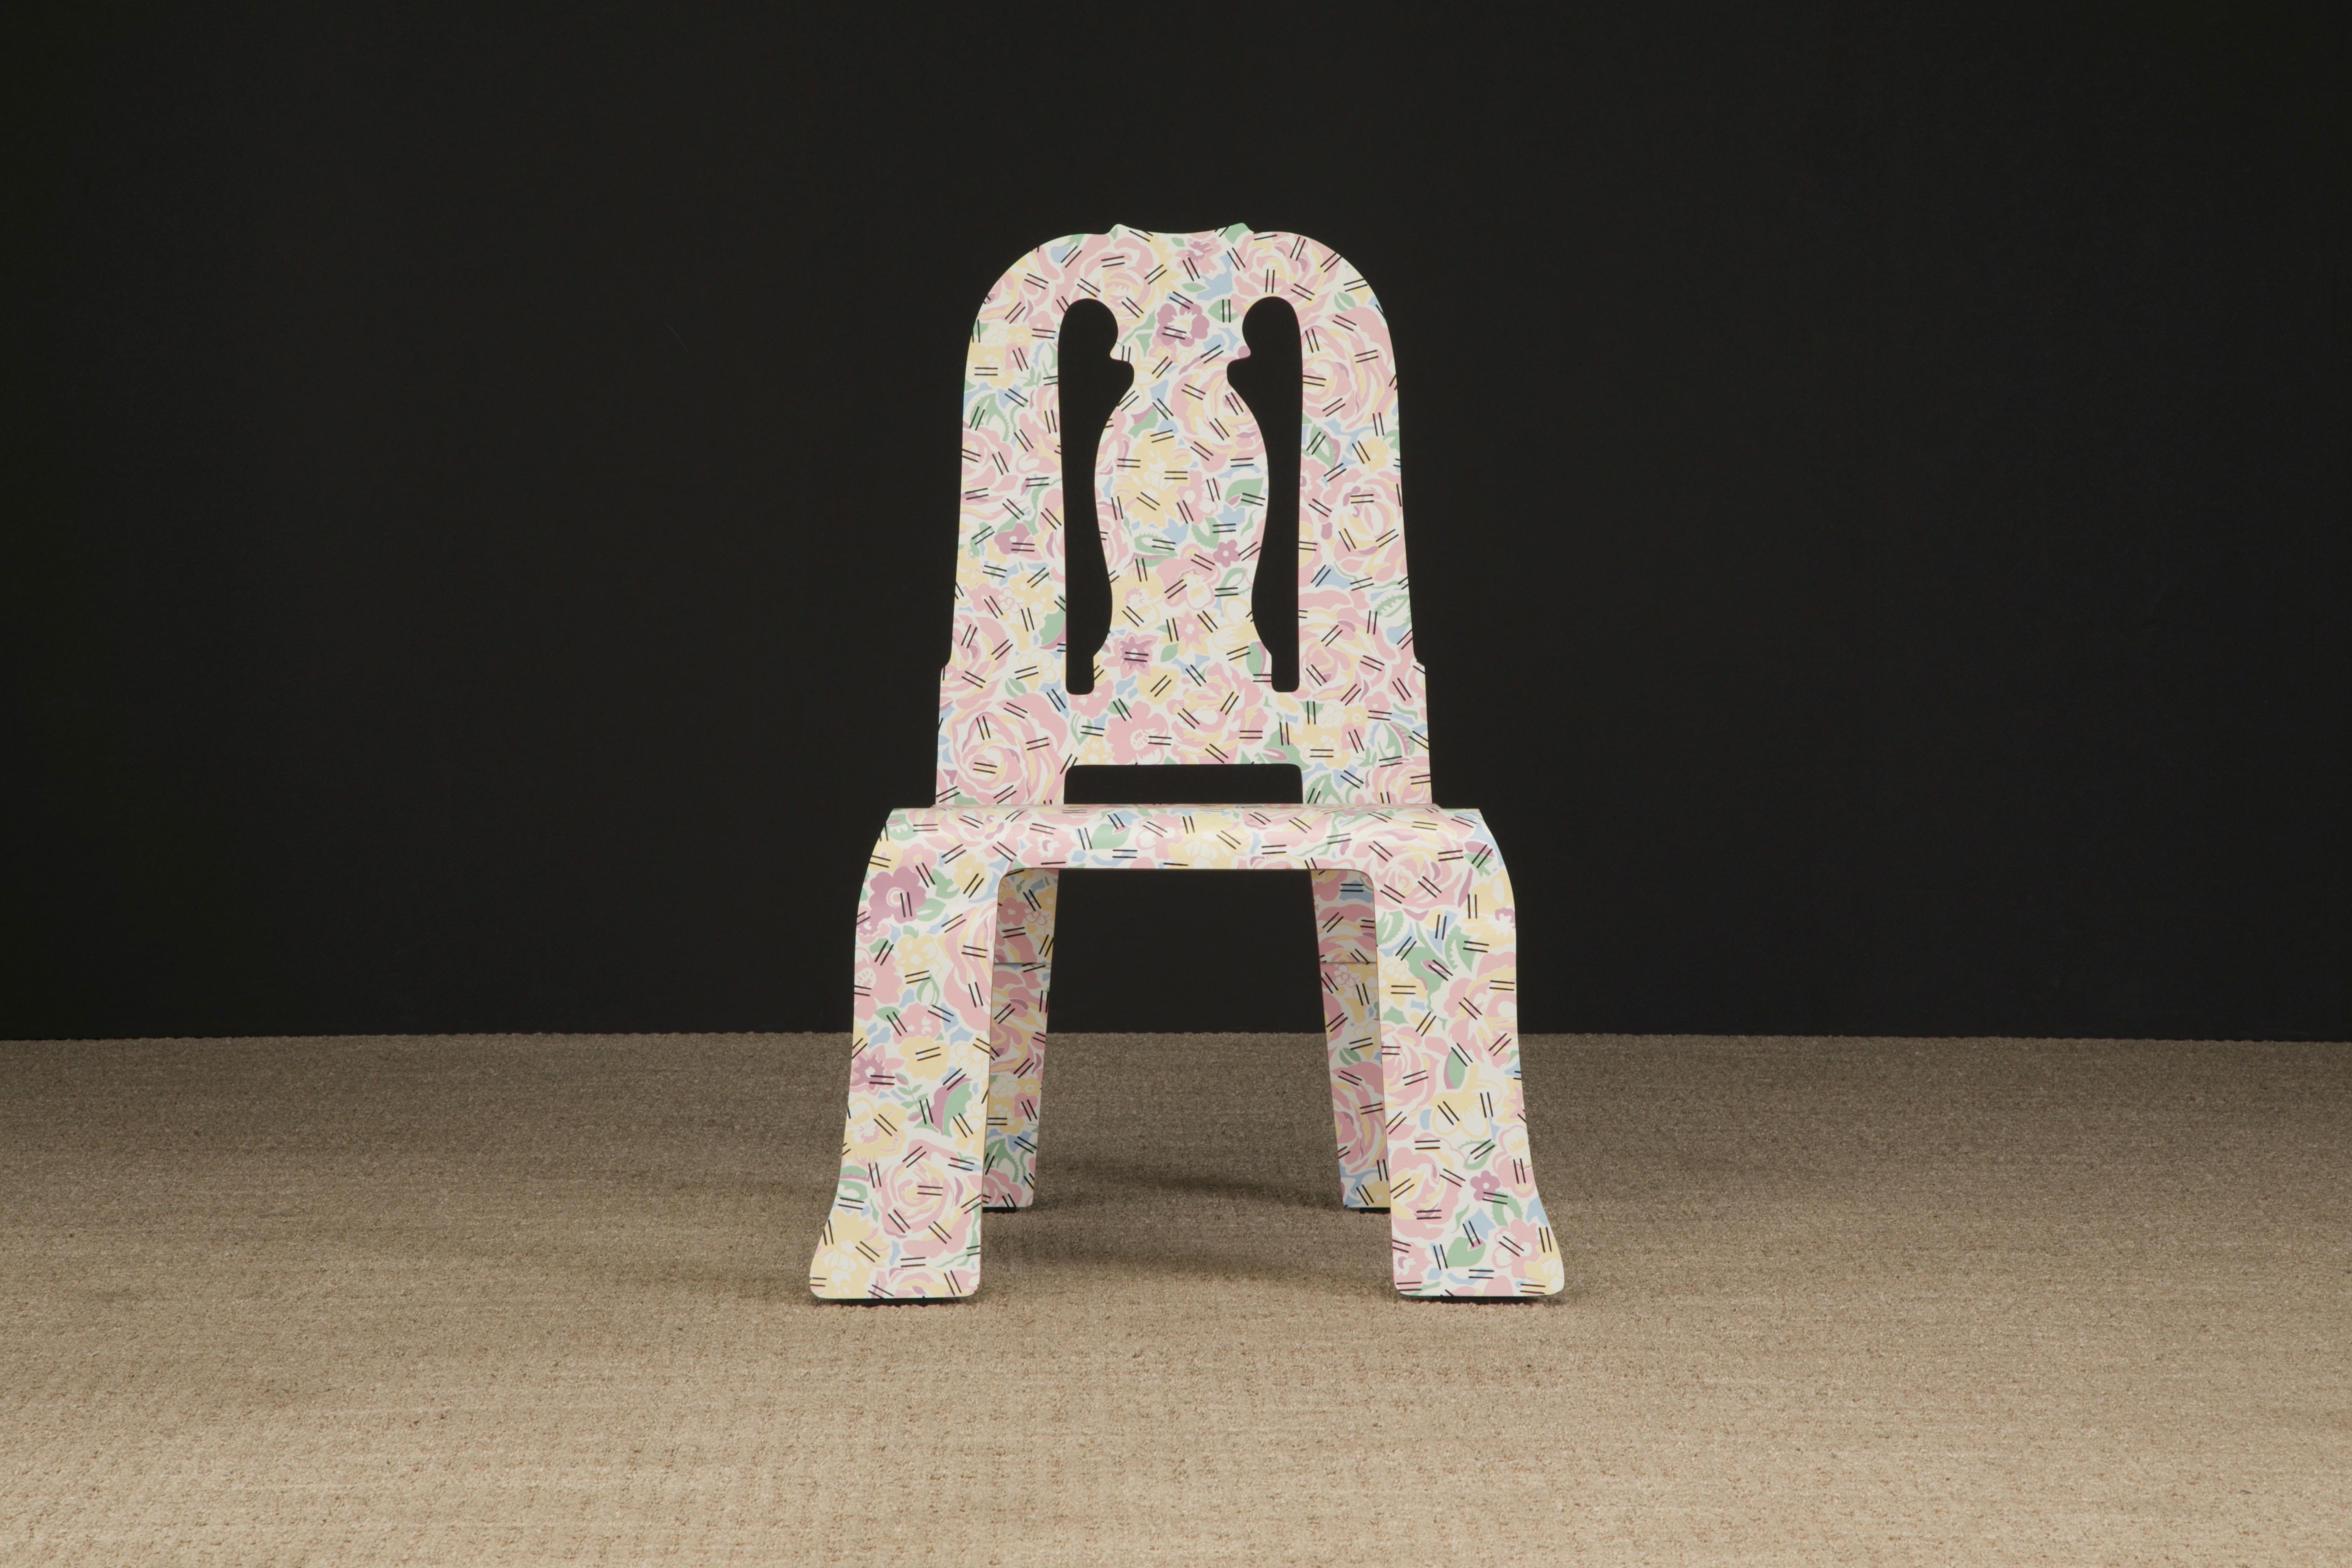 This rare and sought after collectors chair is called the 'Queen Anne' chair in the 'Grandmother Fabric' pattern by Robert Venturi and Denise Scott Brown for Knoll International, circa 1985. Post-Modern functional art ready to be used as a